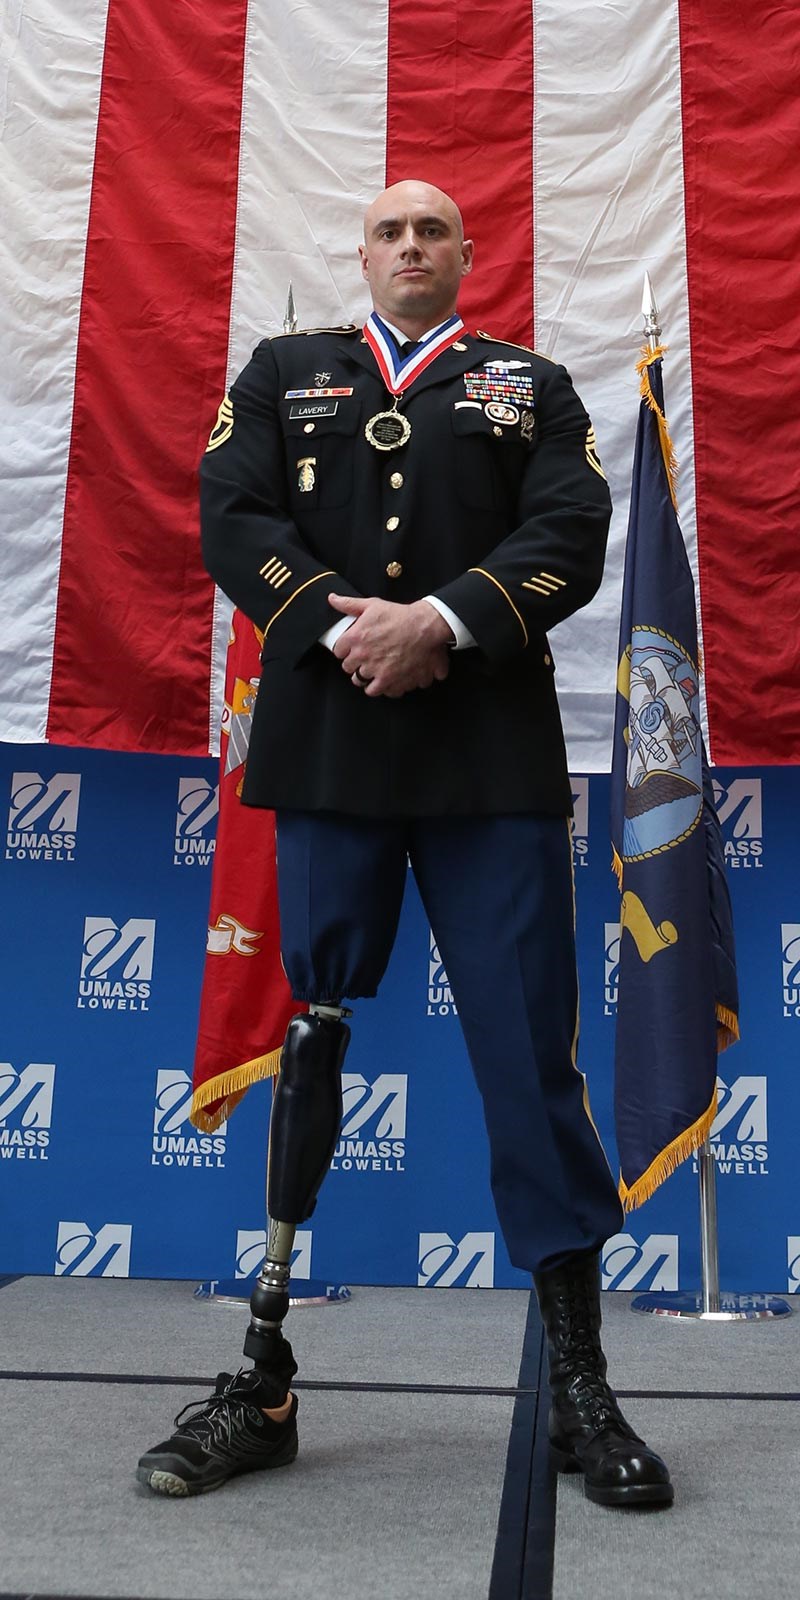 Alumnus, veteran and amputee Nick Lavery stands in front of American flag